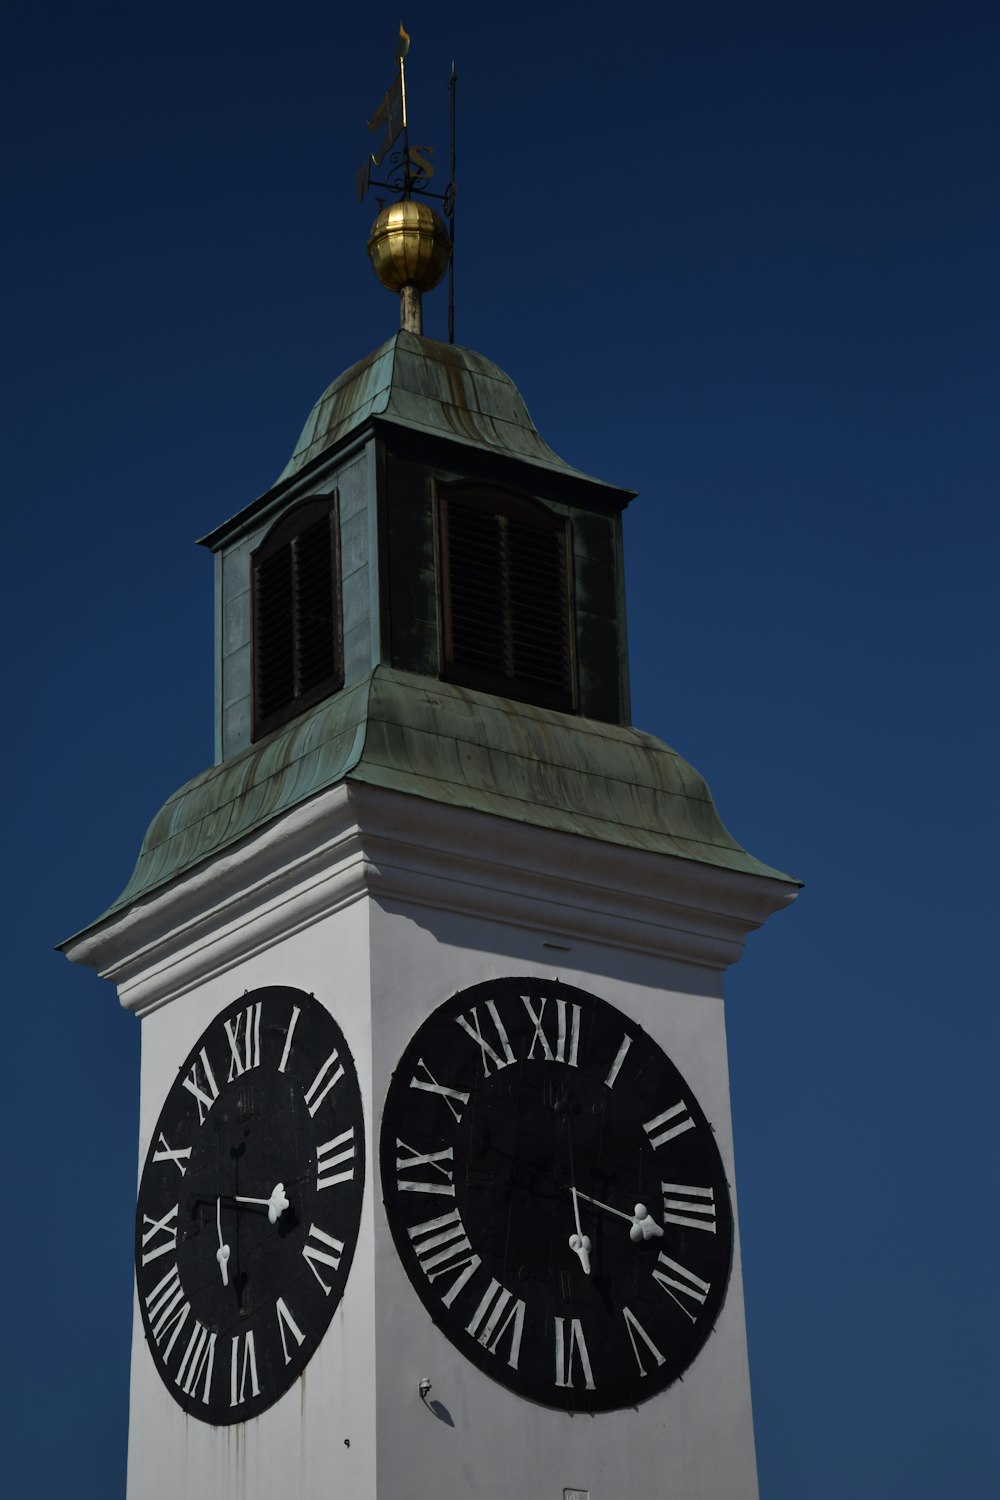 white and black clock tower under blue sky during daytime